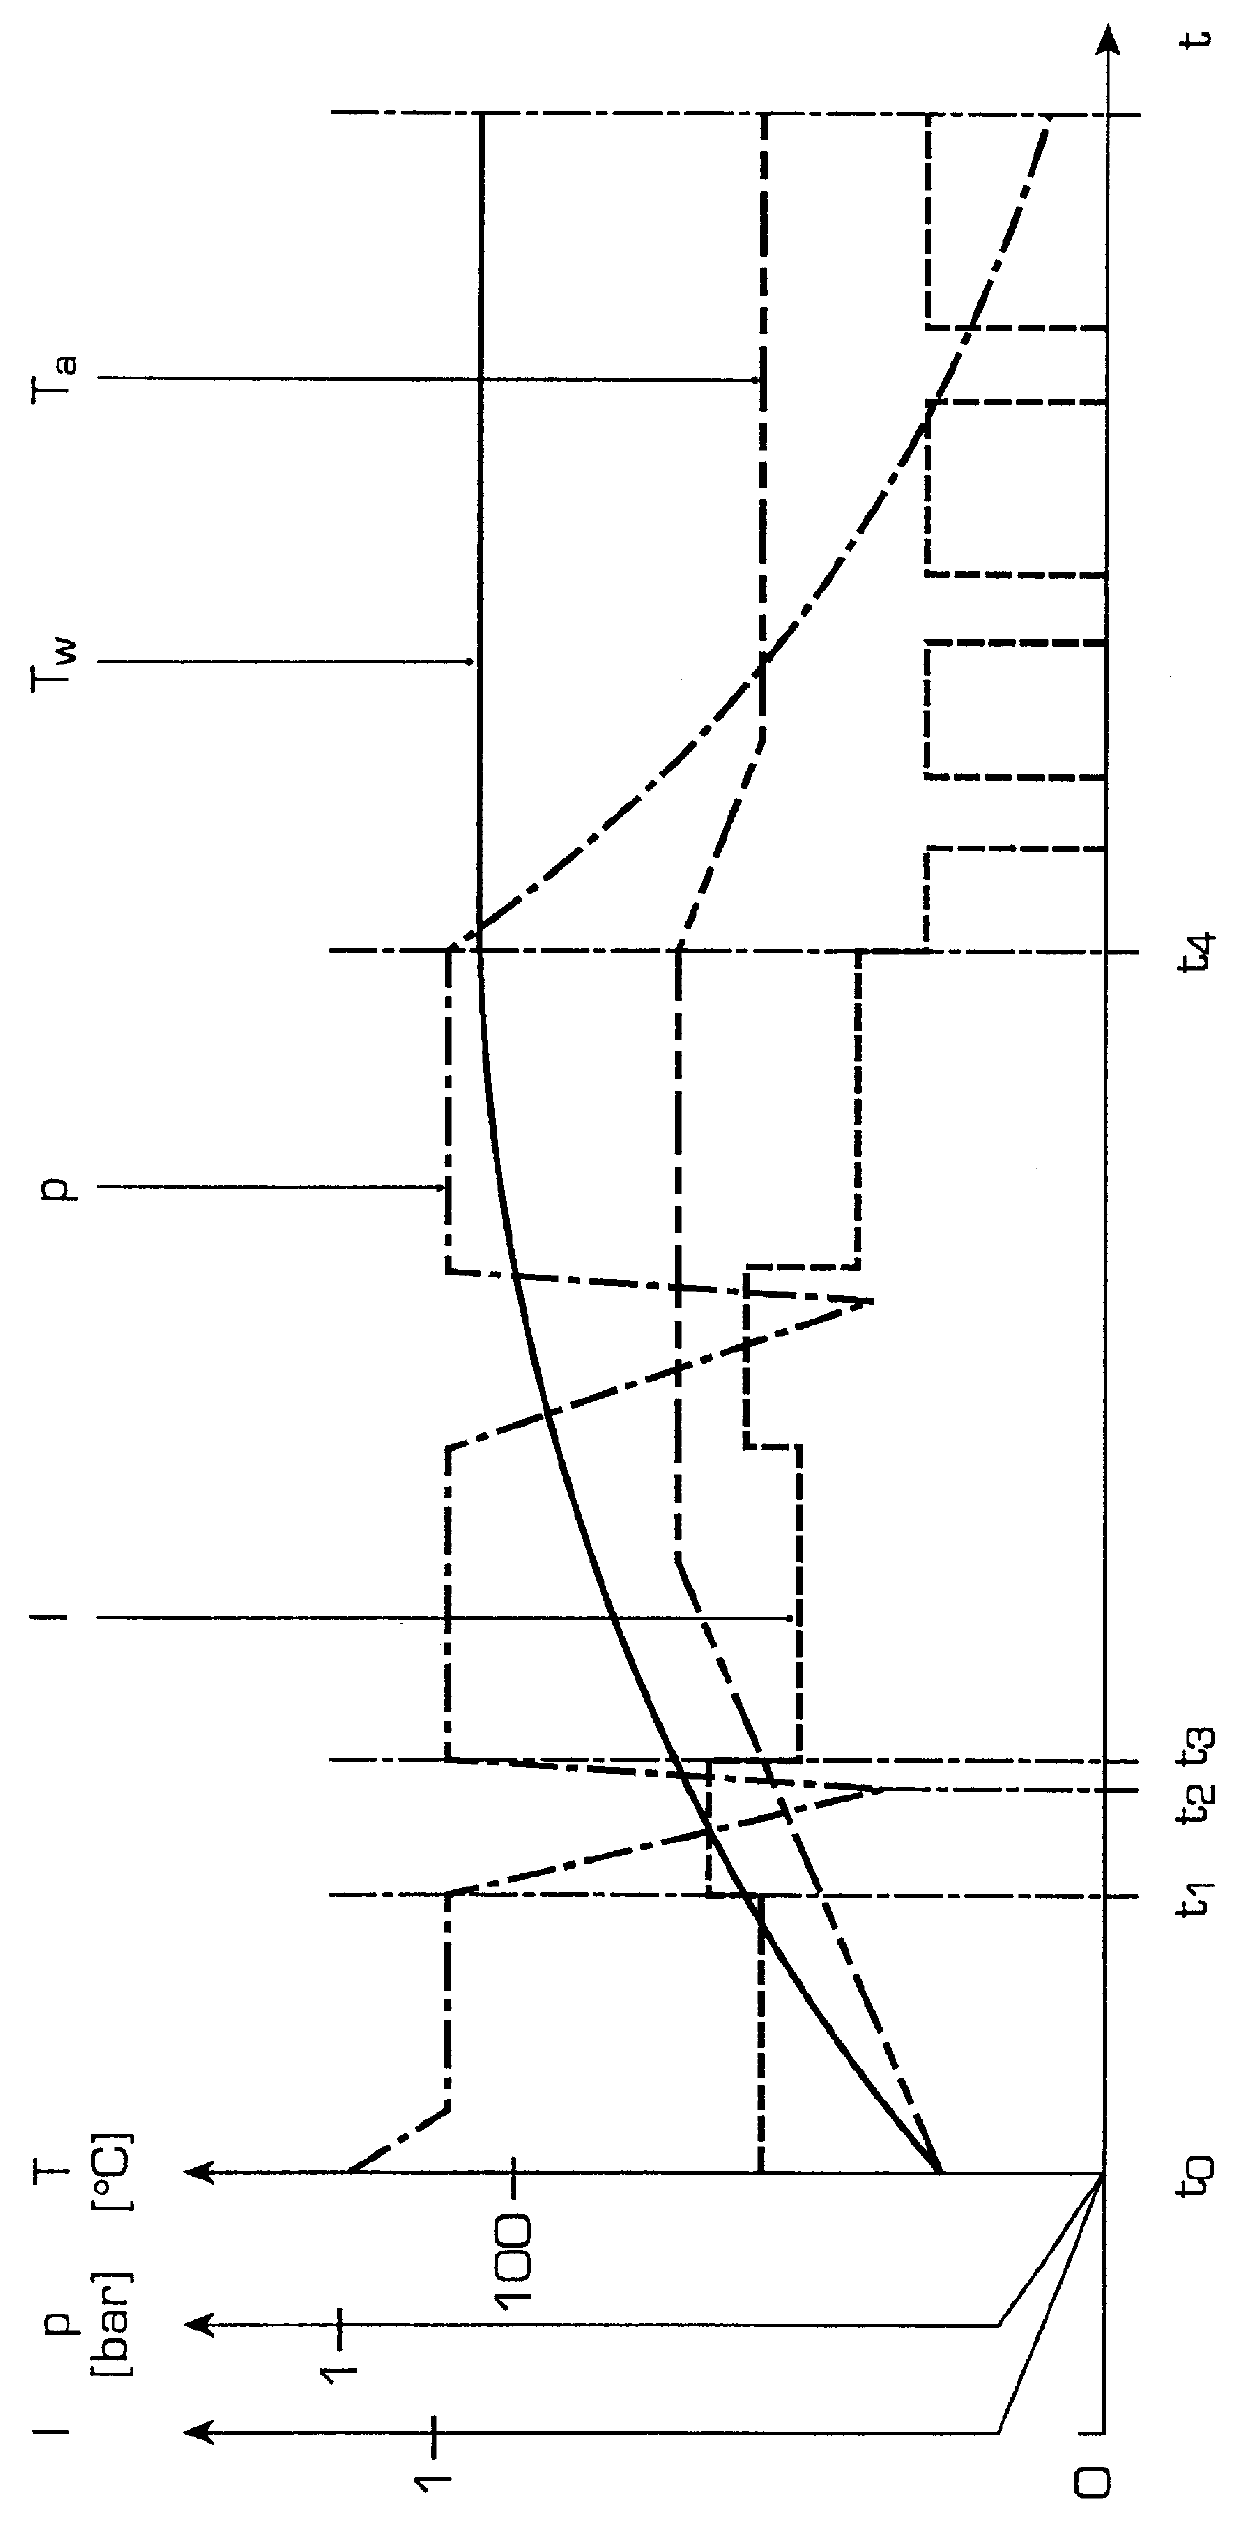 Process for predrying a coil block containing at least one winding and solid insulation